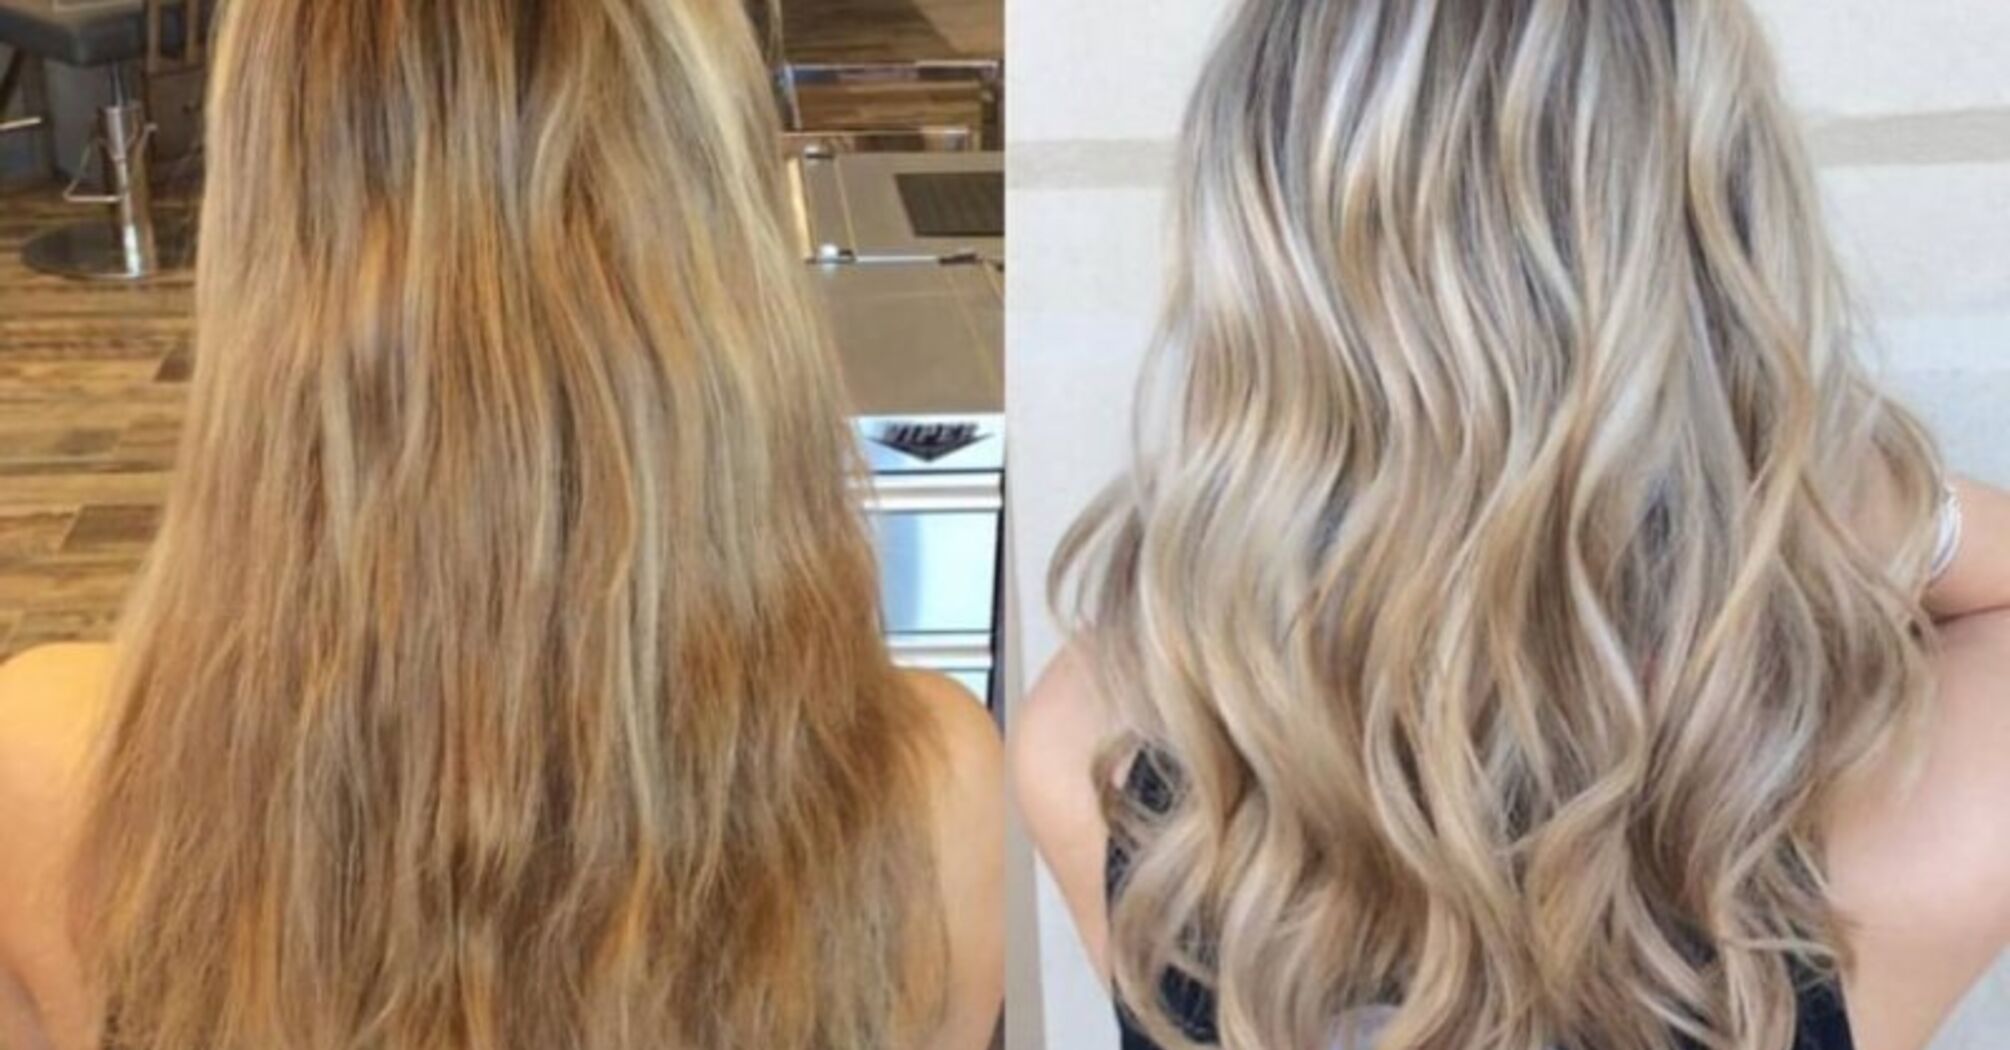 How to get rid of yellow tones after hair coloring